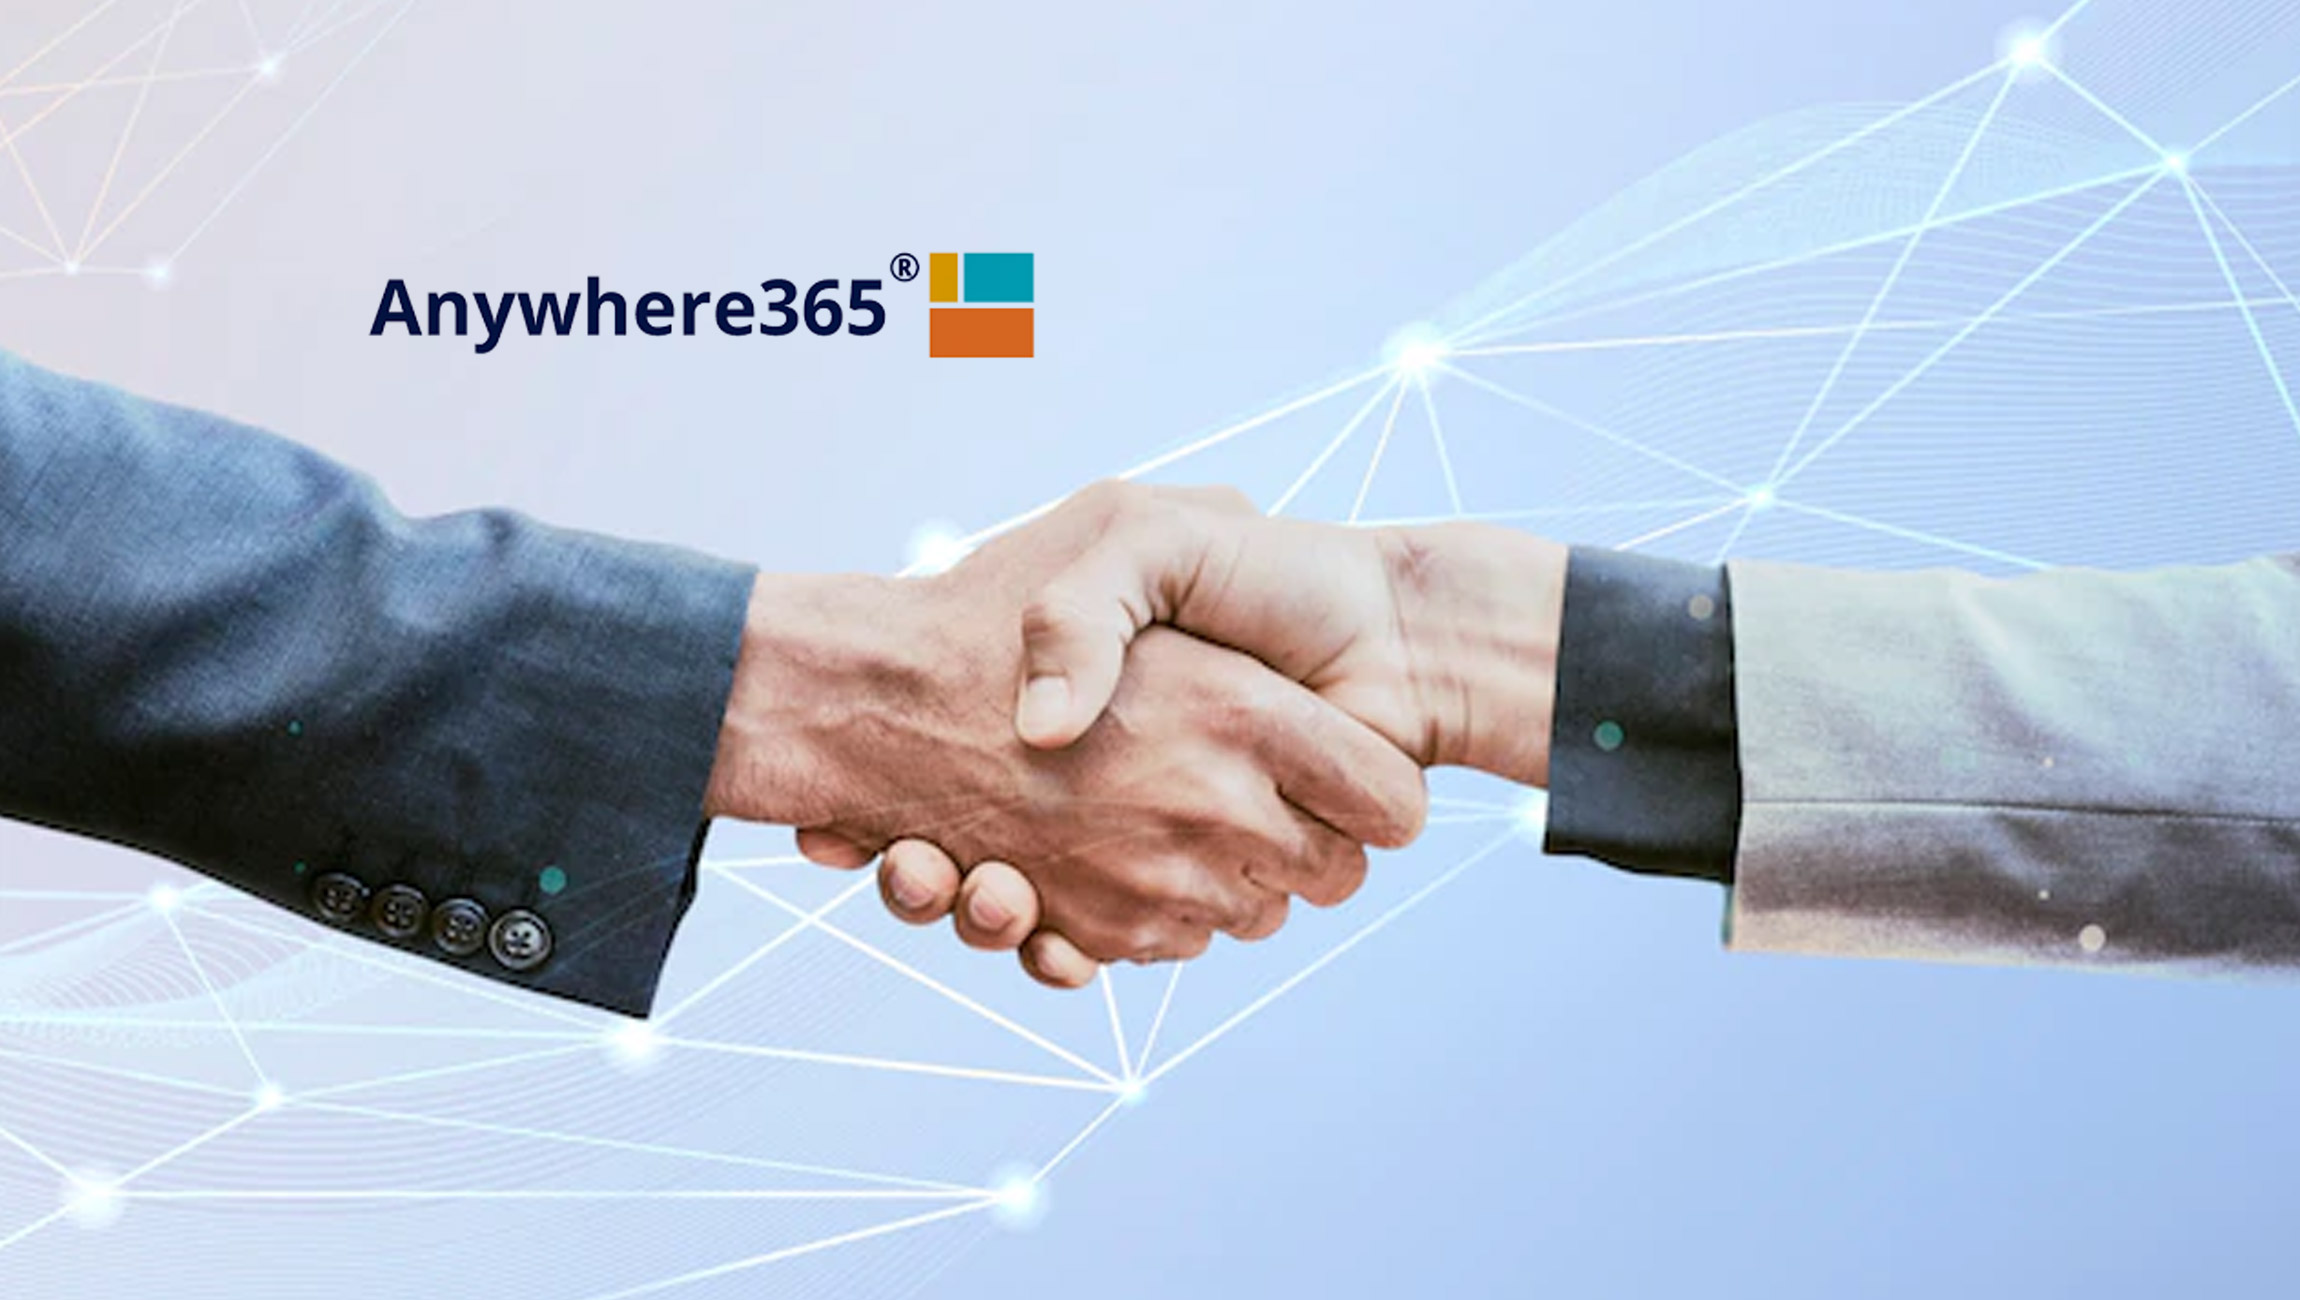 Anywhere365® Launches New Global Partnership Program to Accelerate Growth